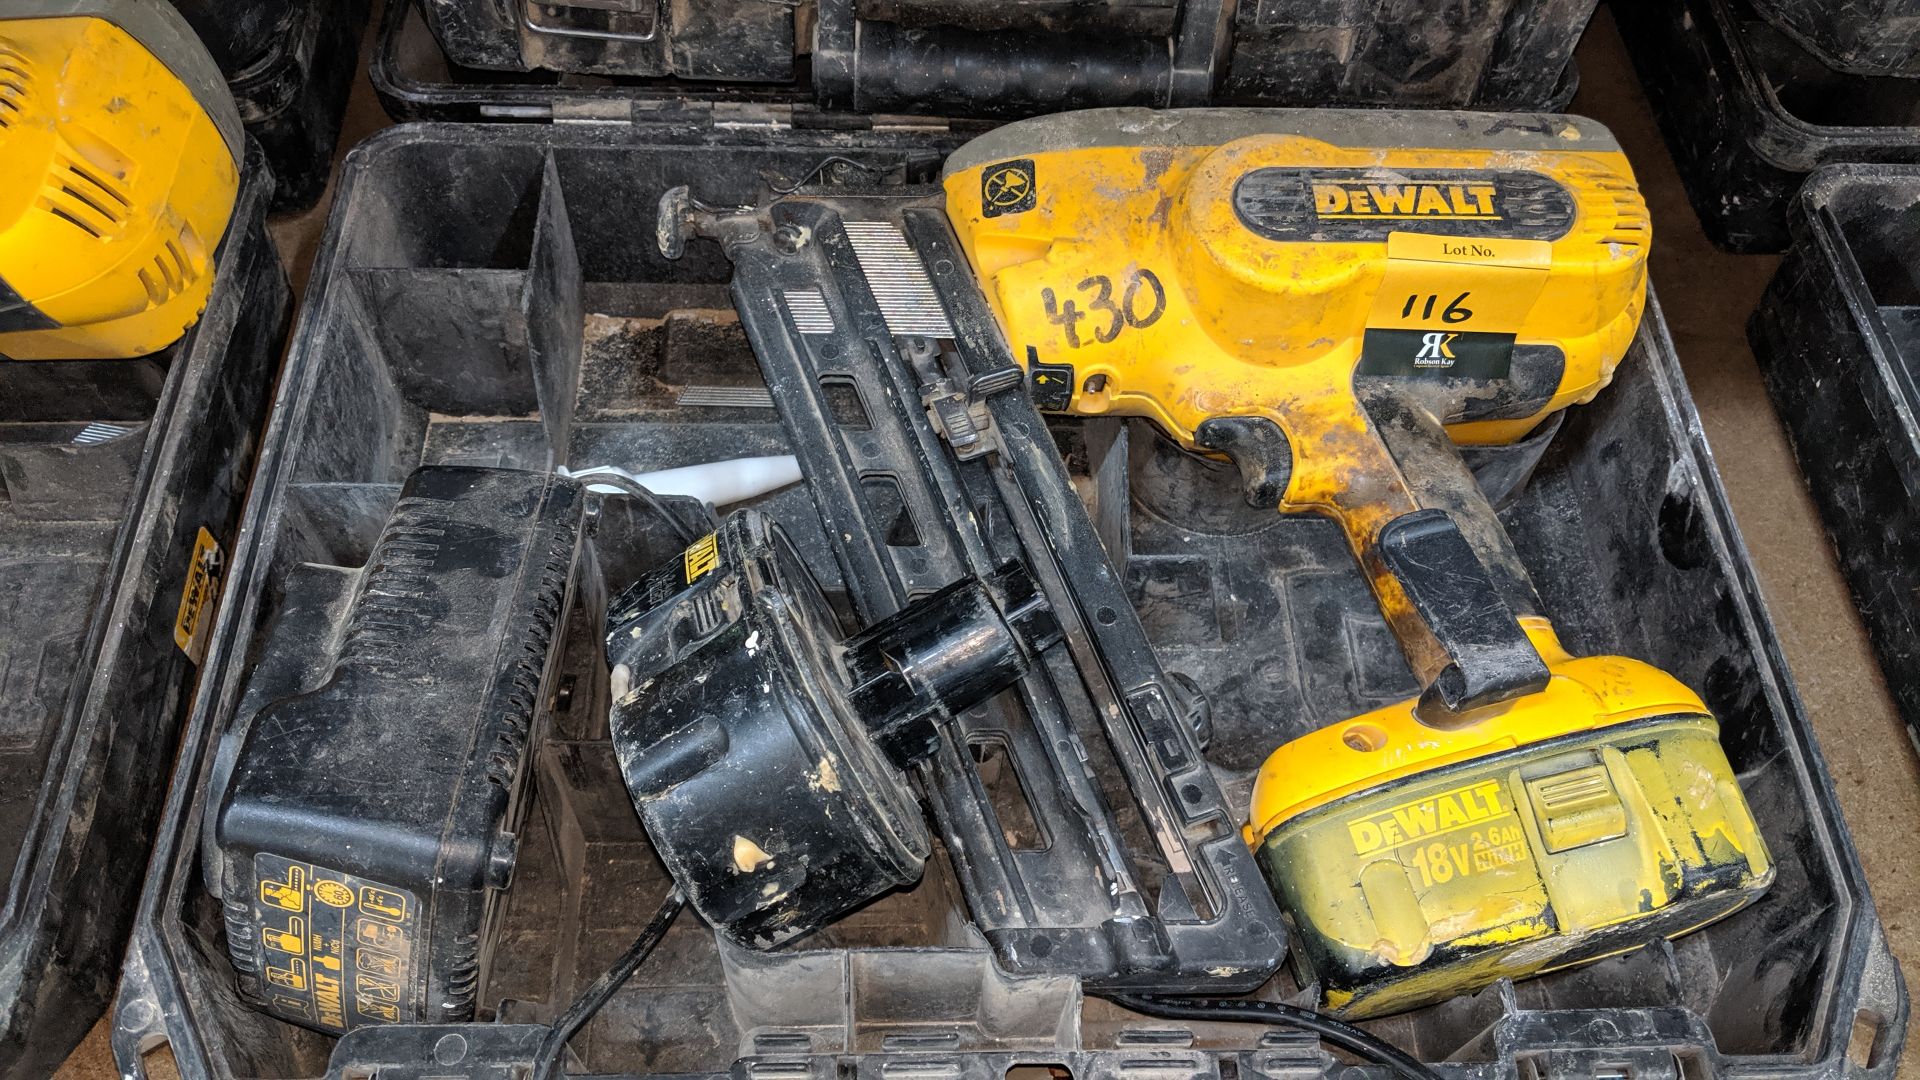 DeWalt cordless nail gun model DC618, including 2 off batteries, 1 off charger & 1 off carry case - Image 2 of 3